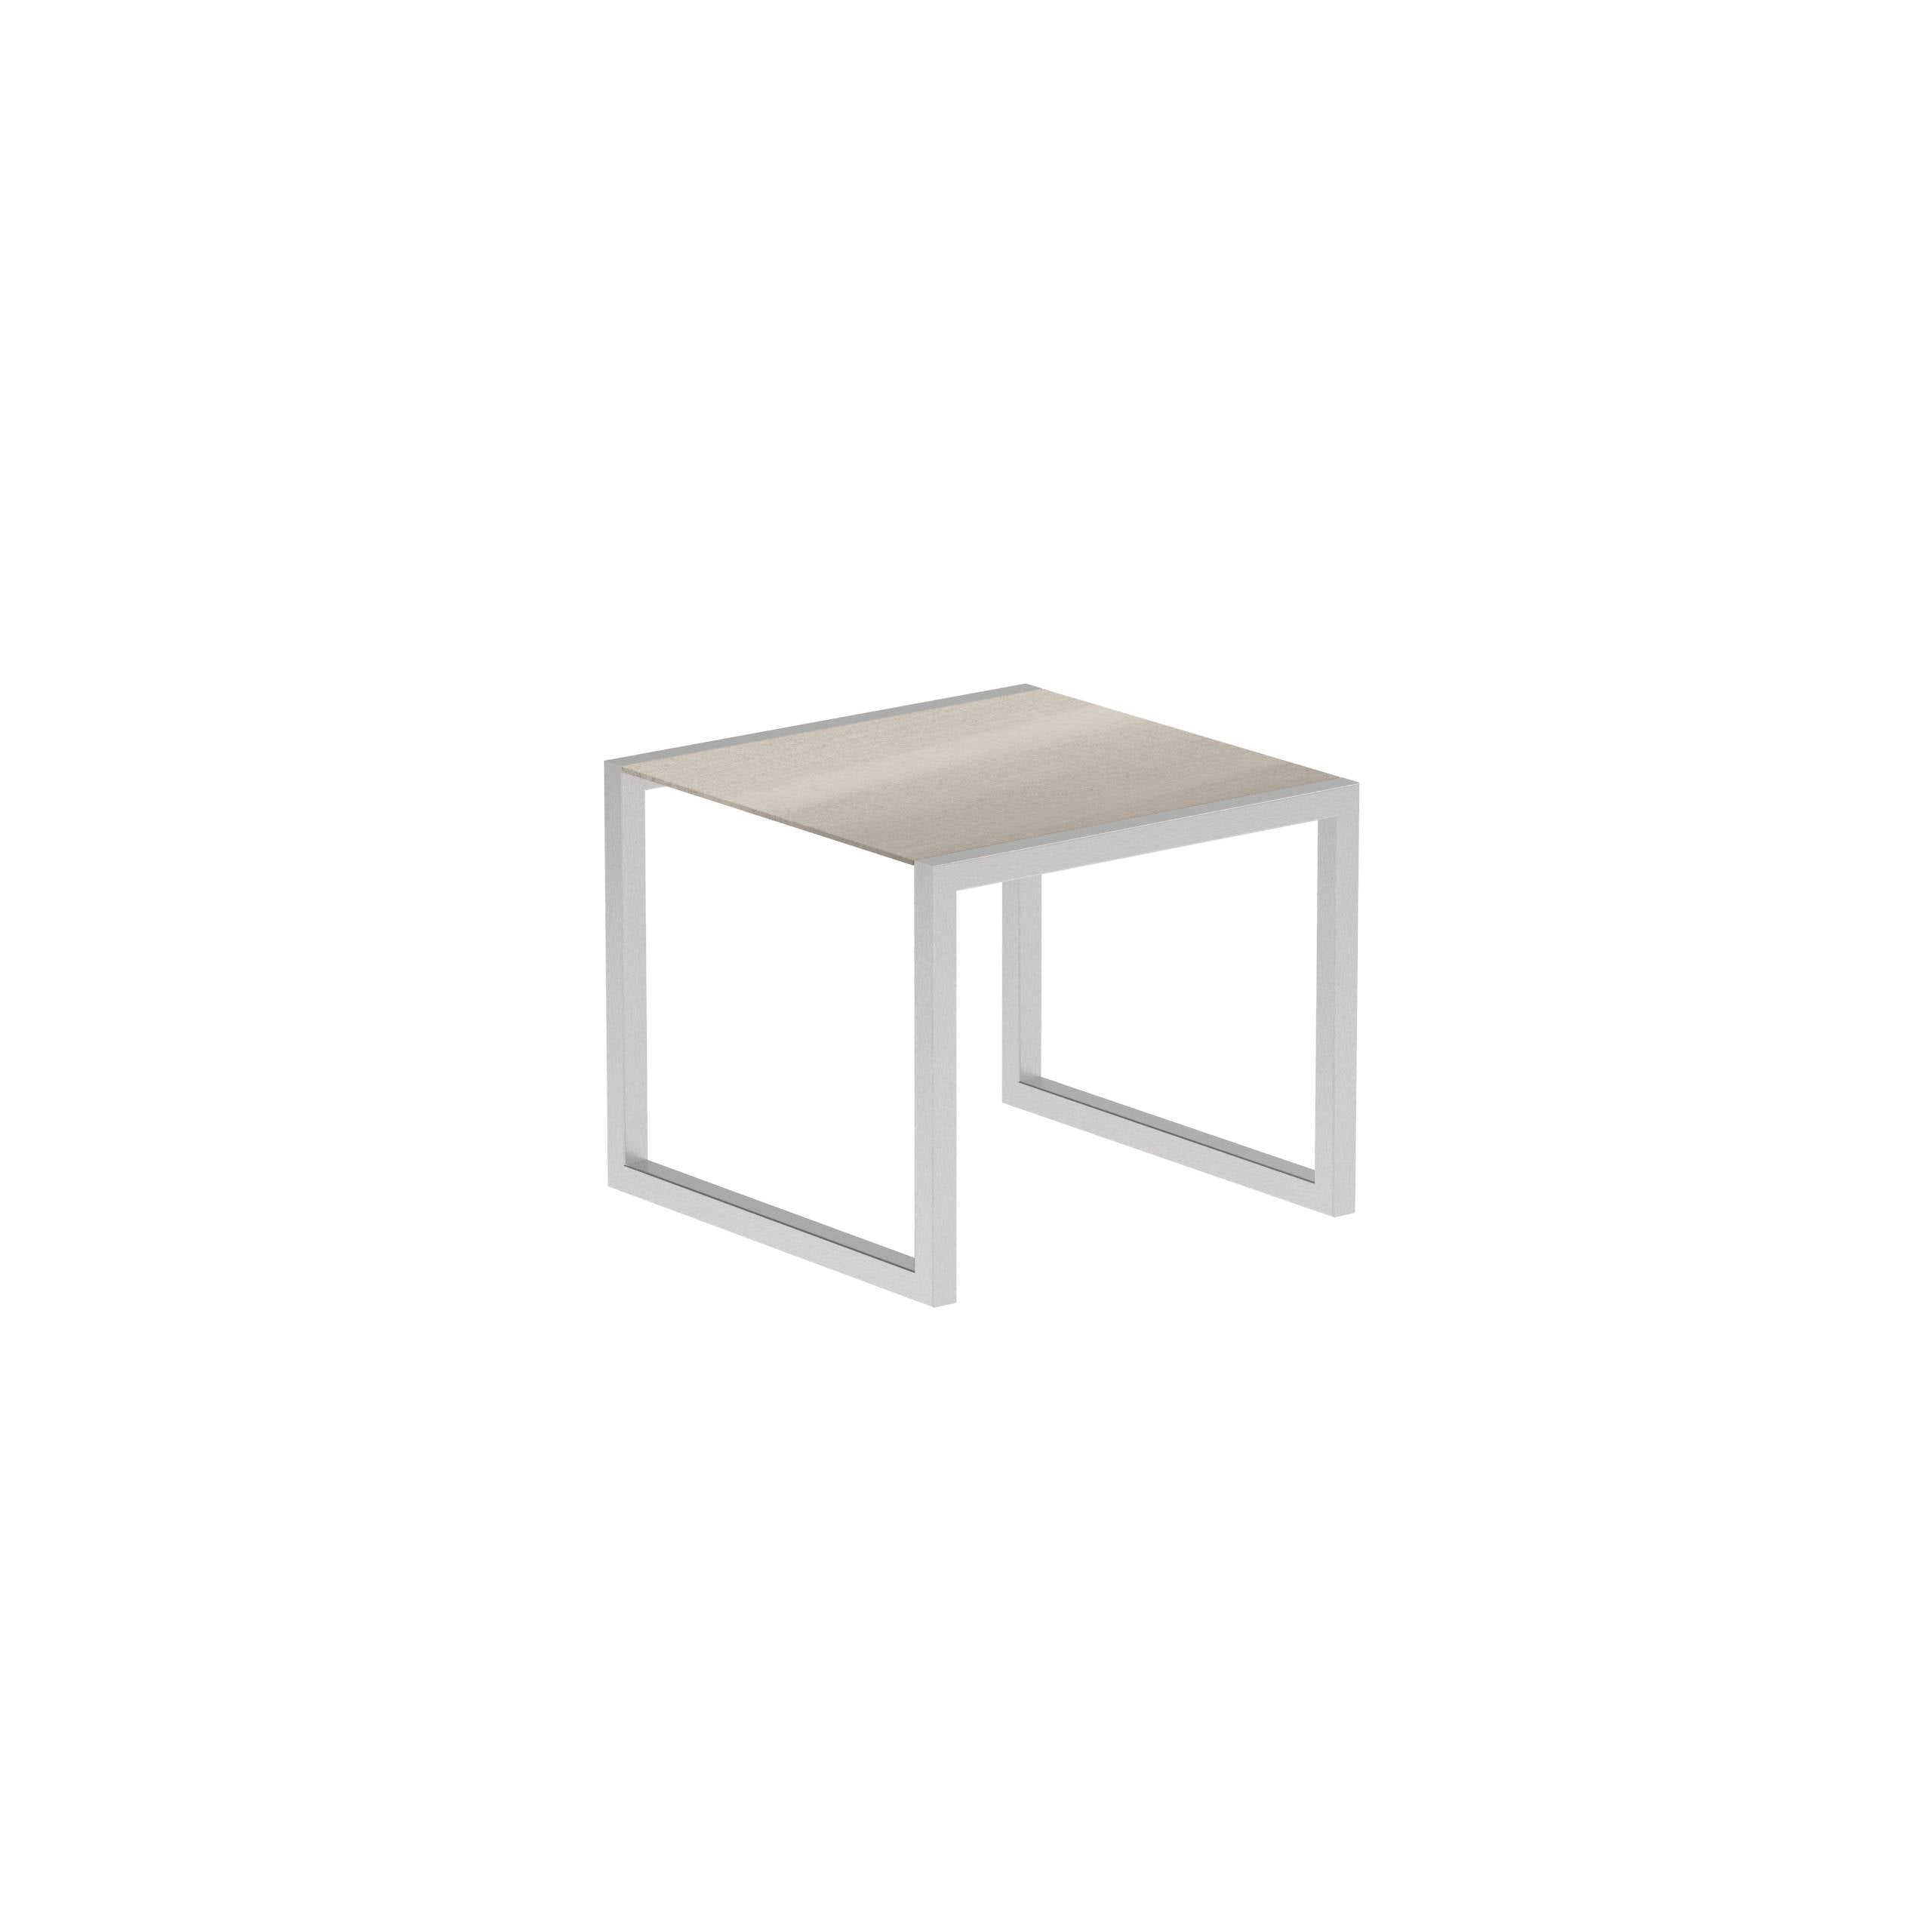 Ninix Table 90x90cm With Stainless Steel And Ceramic Taupe Grey